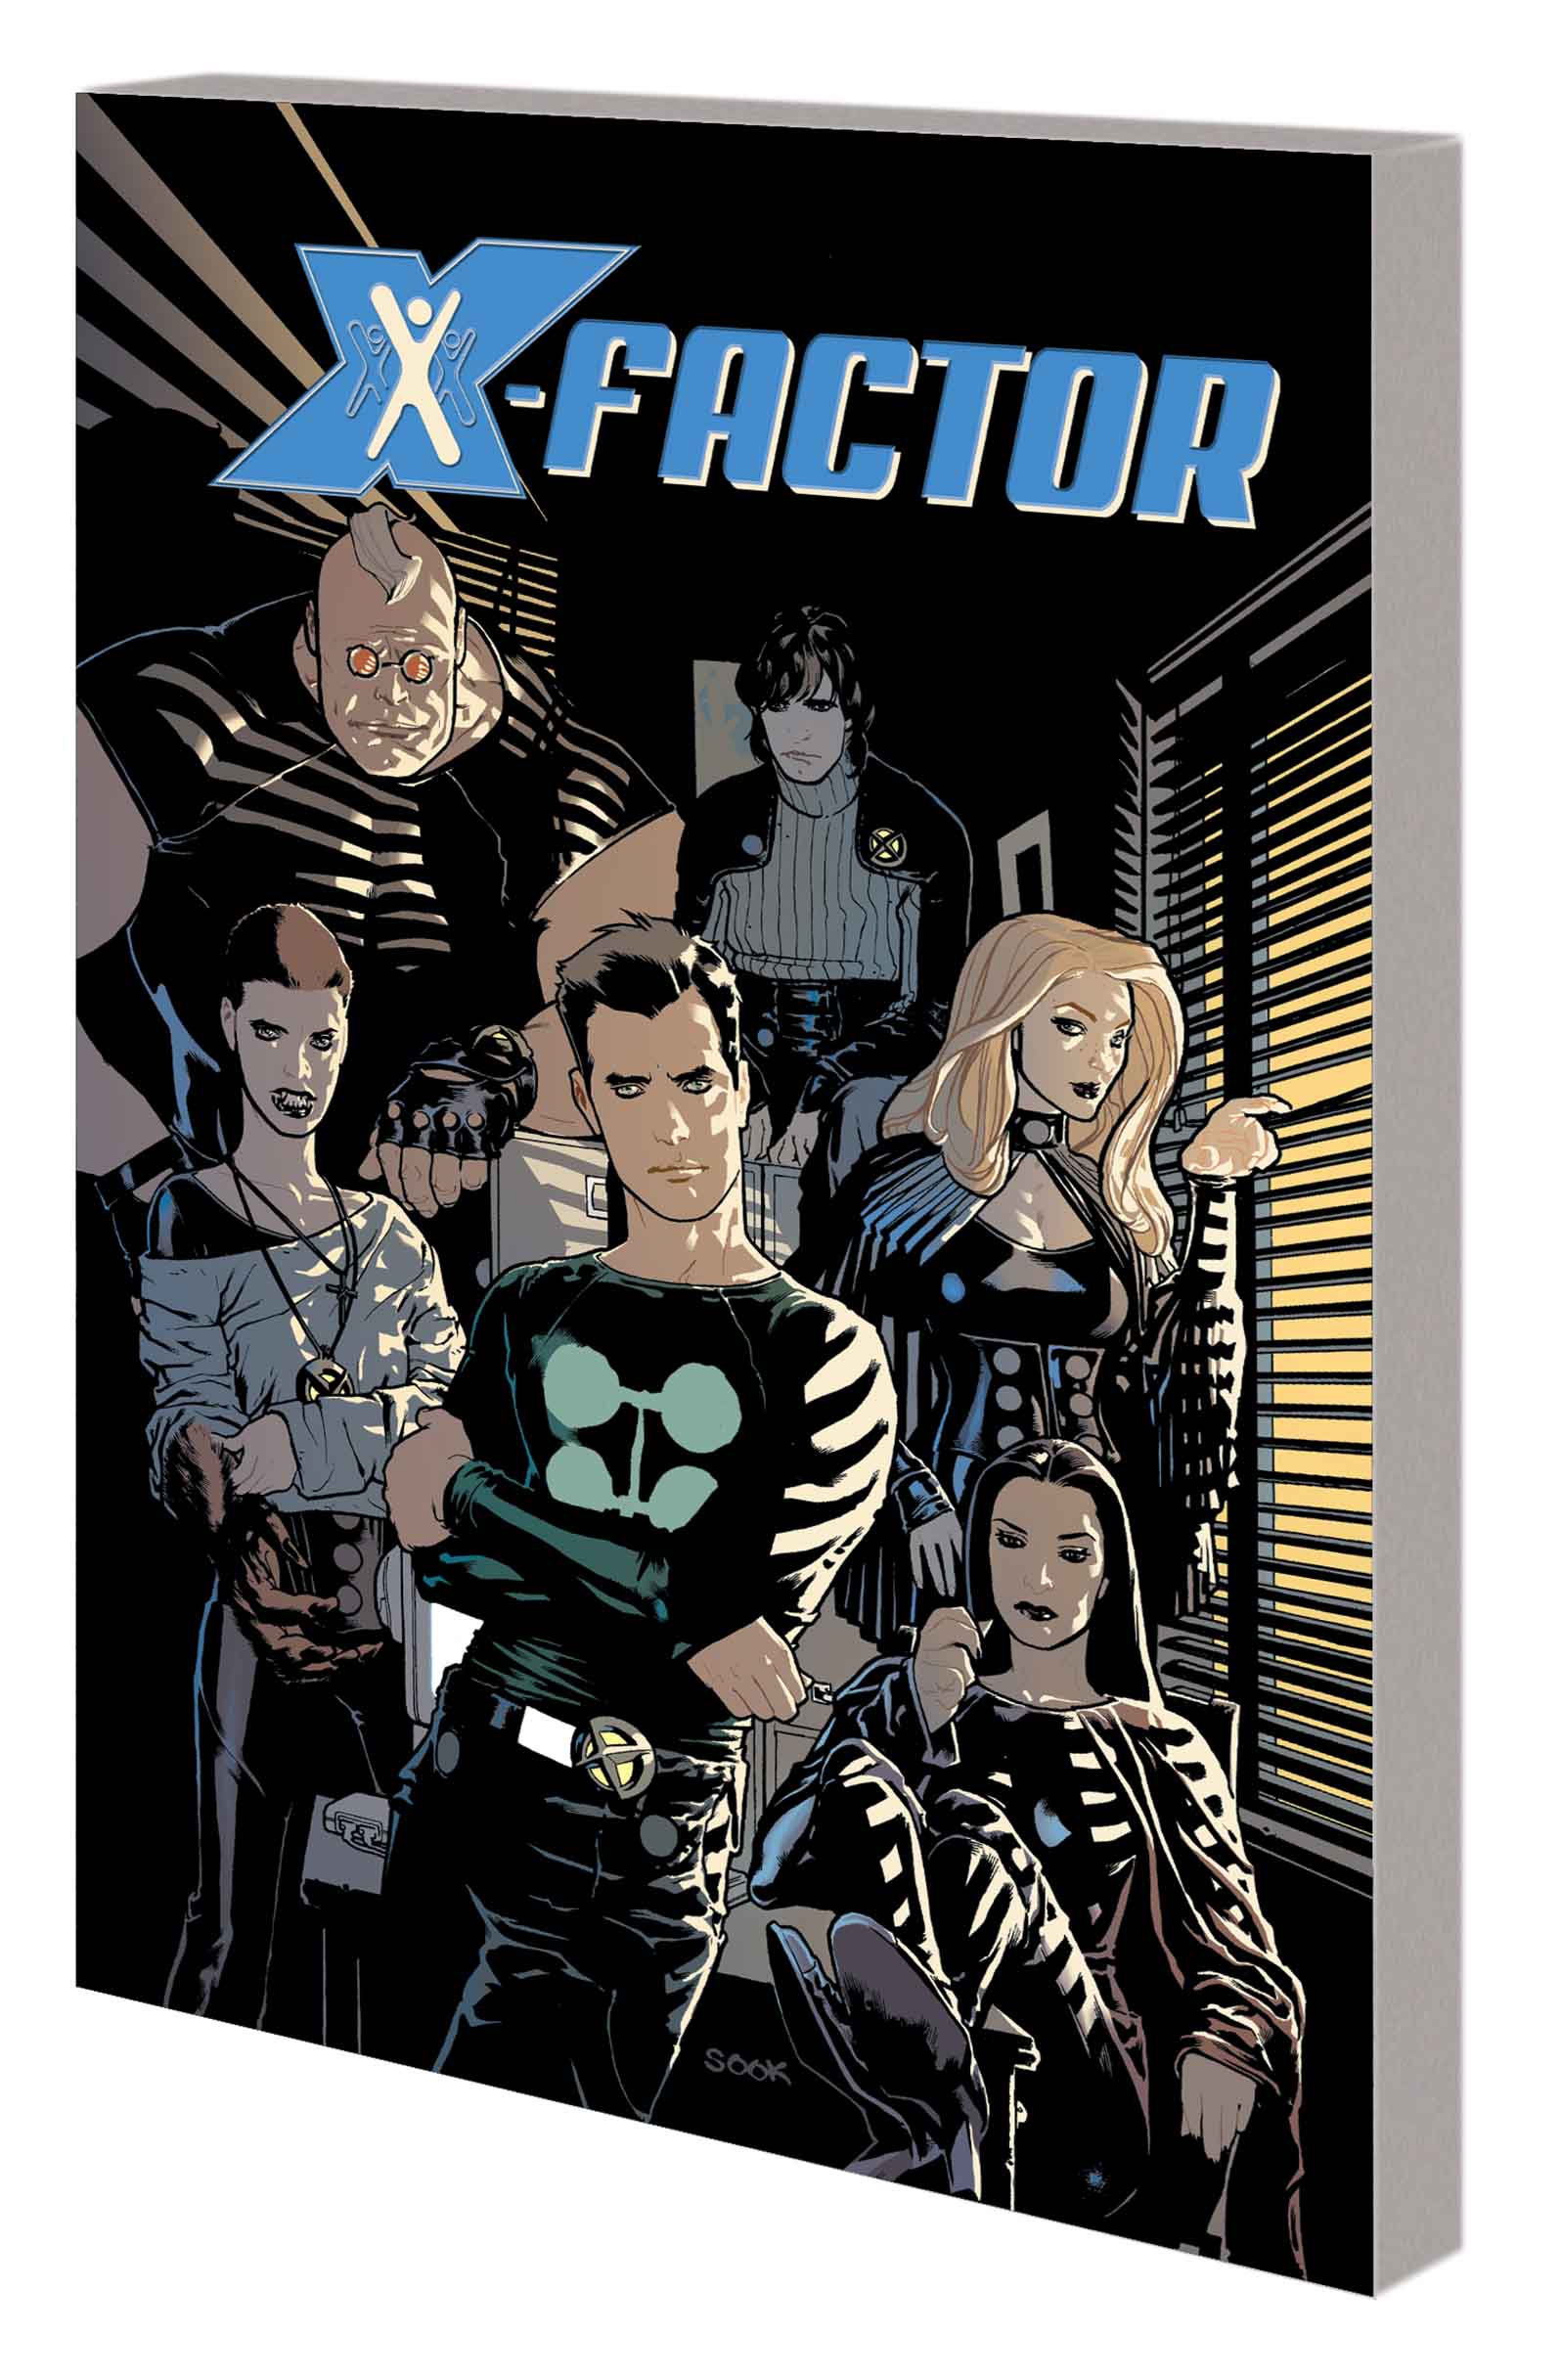 X-Factor by Peter David: The Complete Collection (Trade Paperback)